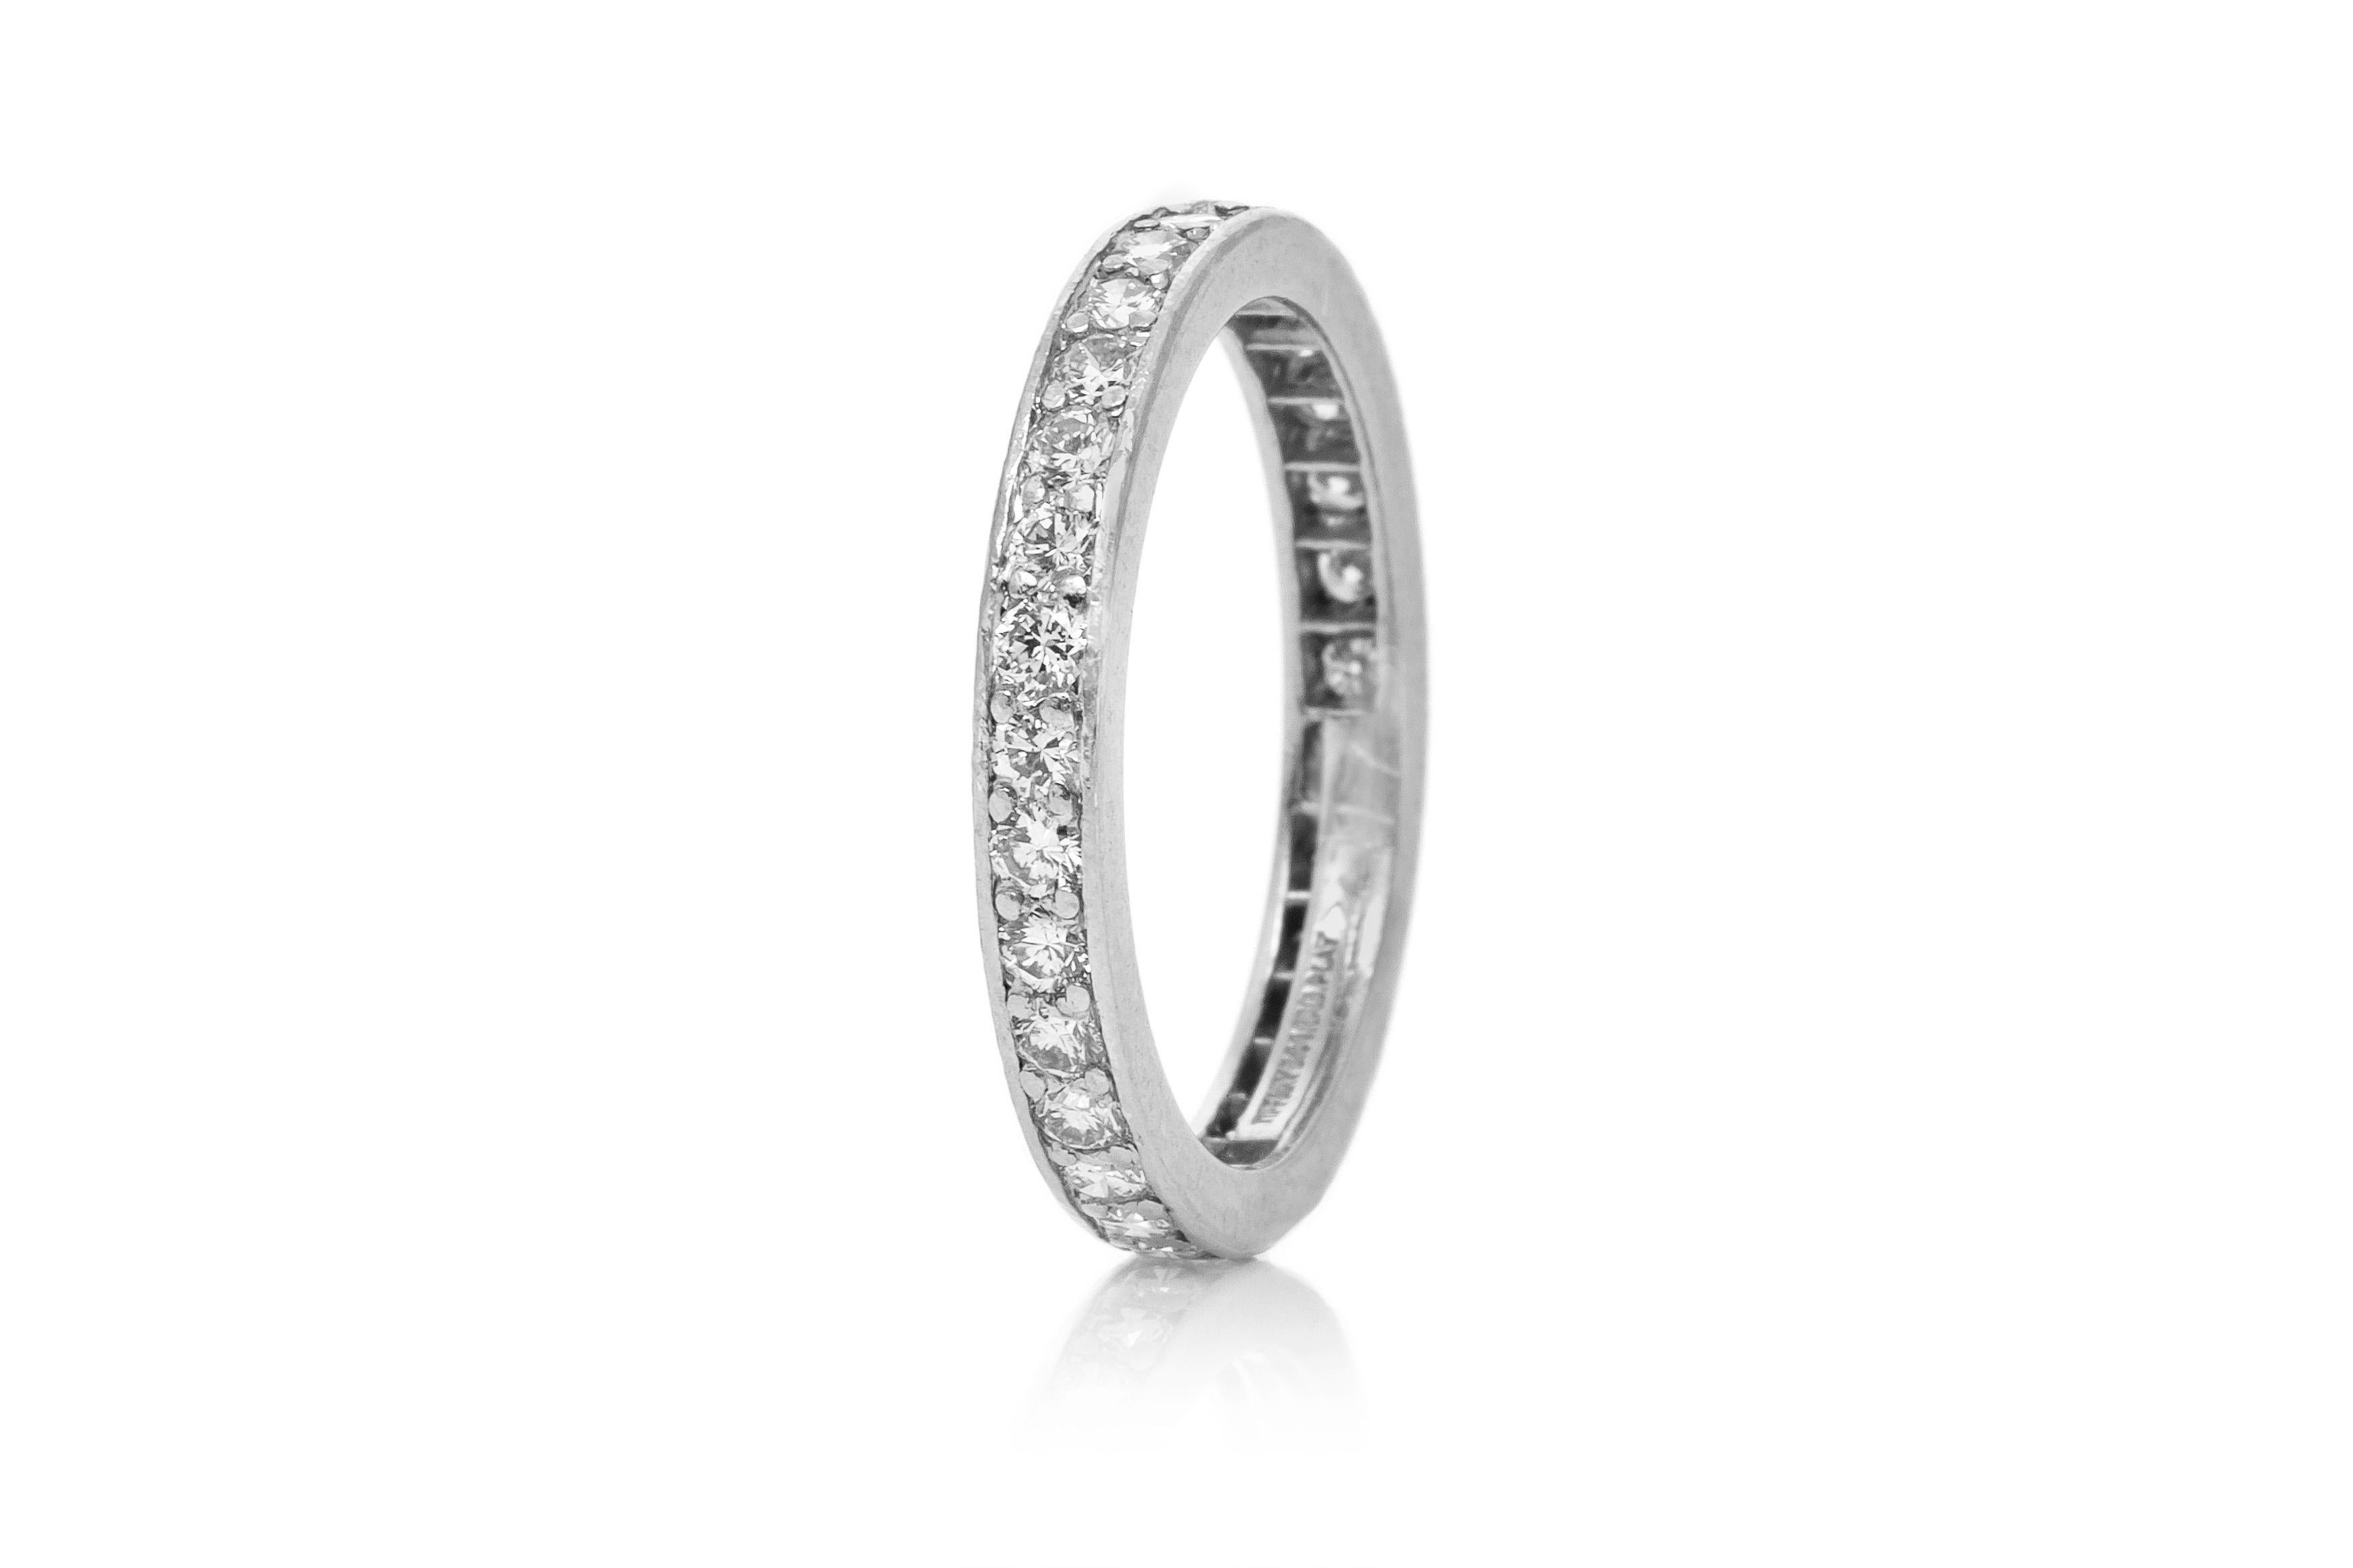 Finely crafted in platinum with round brilliant cut diamonds weighing approximately a total of 1.80 carats.
Siged by Tiffany & Co.
Circa 1960's.